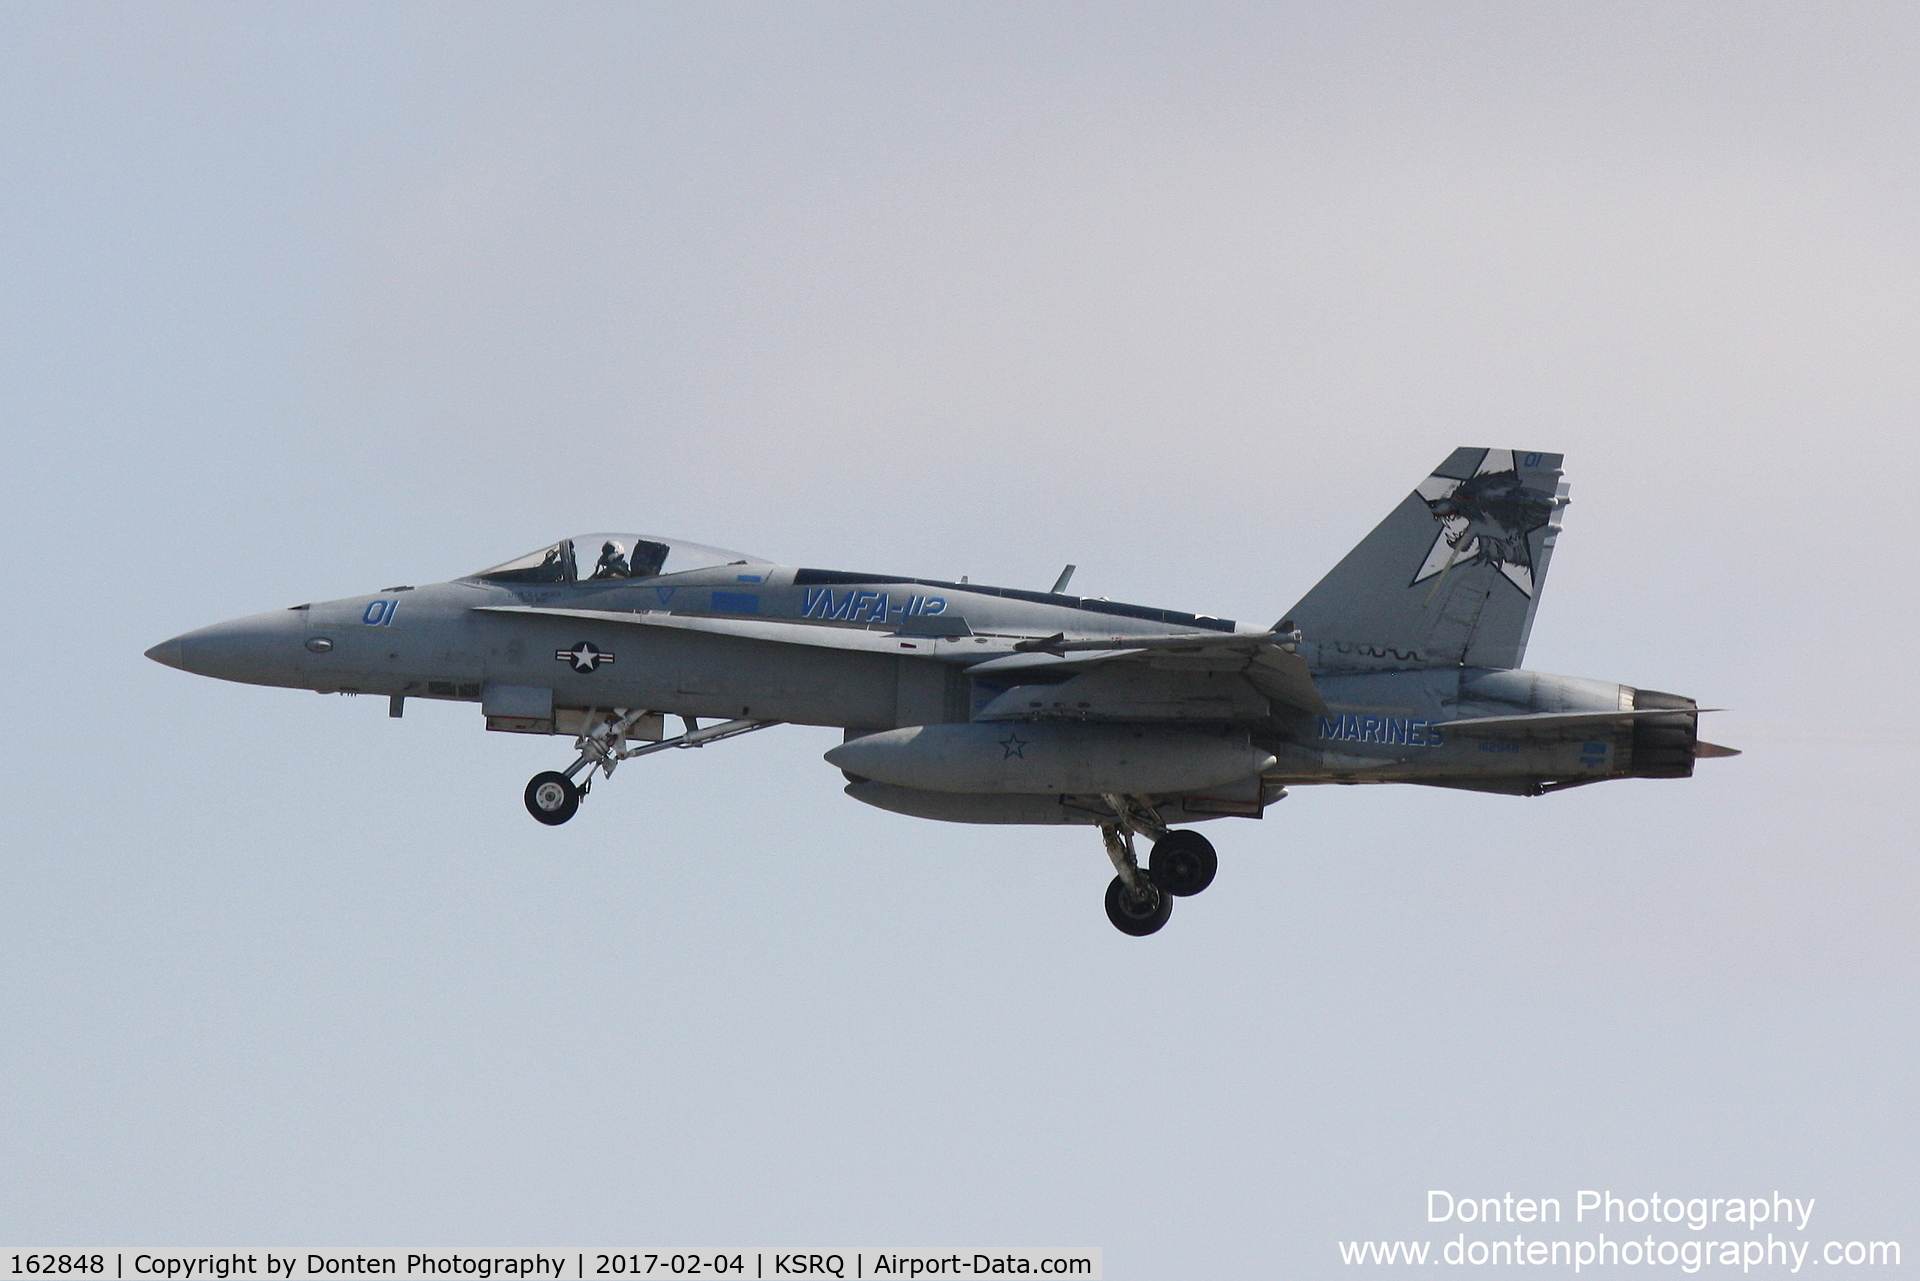 162848, McDonnell Douglas F/A-18A++ Hornet C/N 374/A313, A USMC F/A-18 Hornet (162848) from Marine Fighter Attack Squadron 112 at Naval Air Station Joint Reserve Base Fort Worth departs Sarasota-Bradenton International Airport